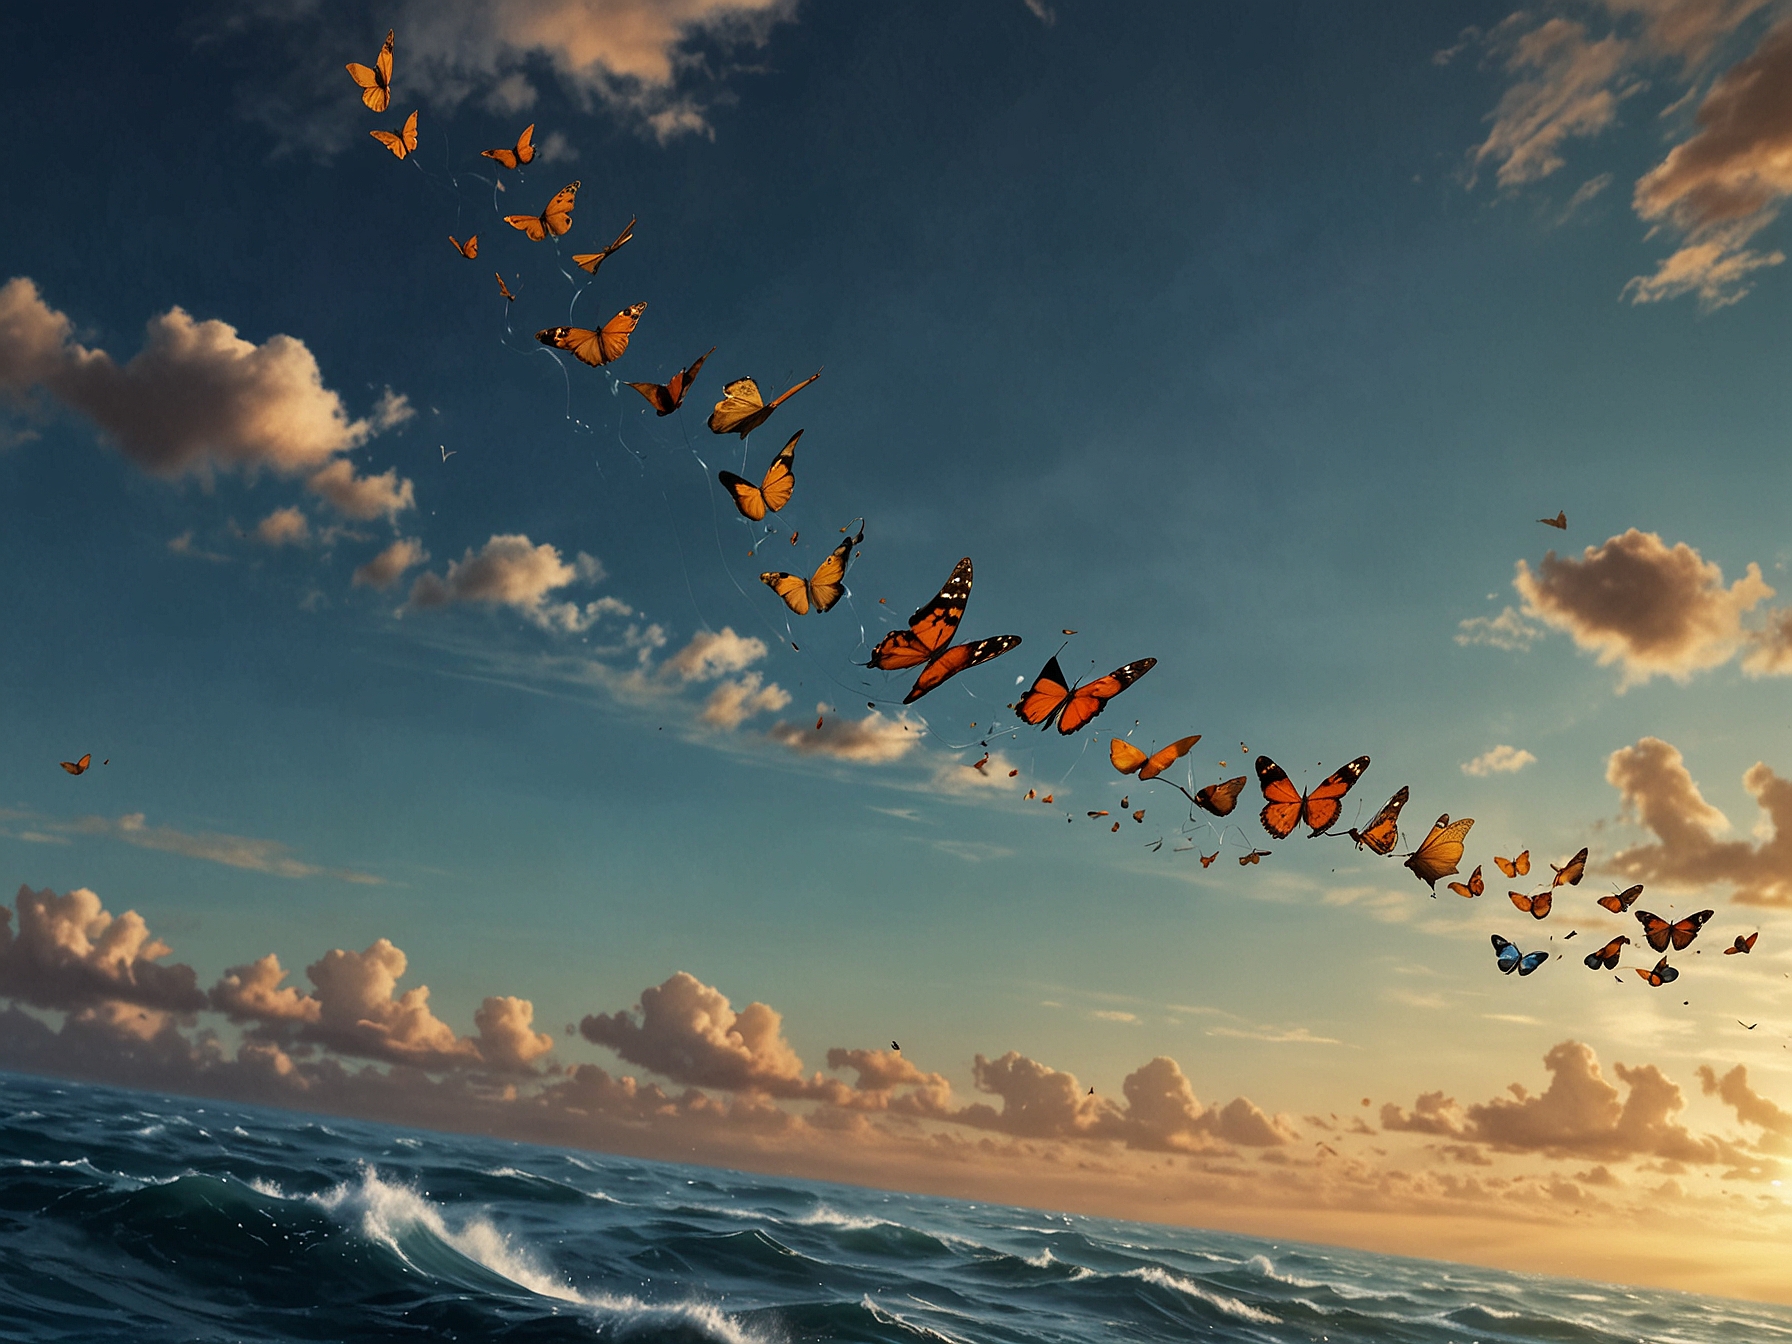 Illustration of a group of Painted Lady butterflies riding wind currents high above the Atlantic Ocean, showcasing their impressive migratory journey without stopping.